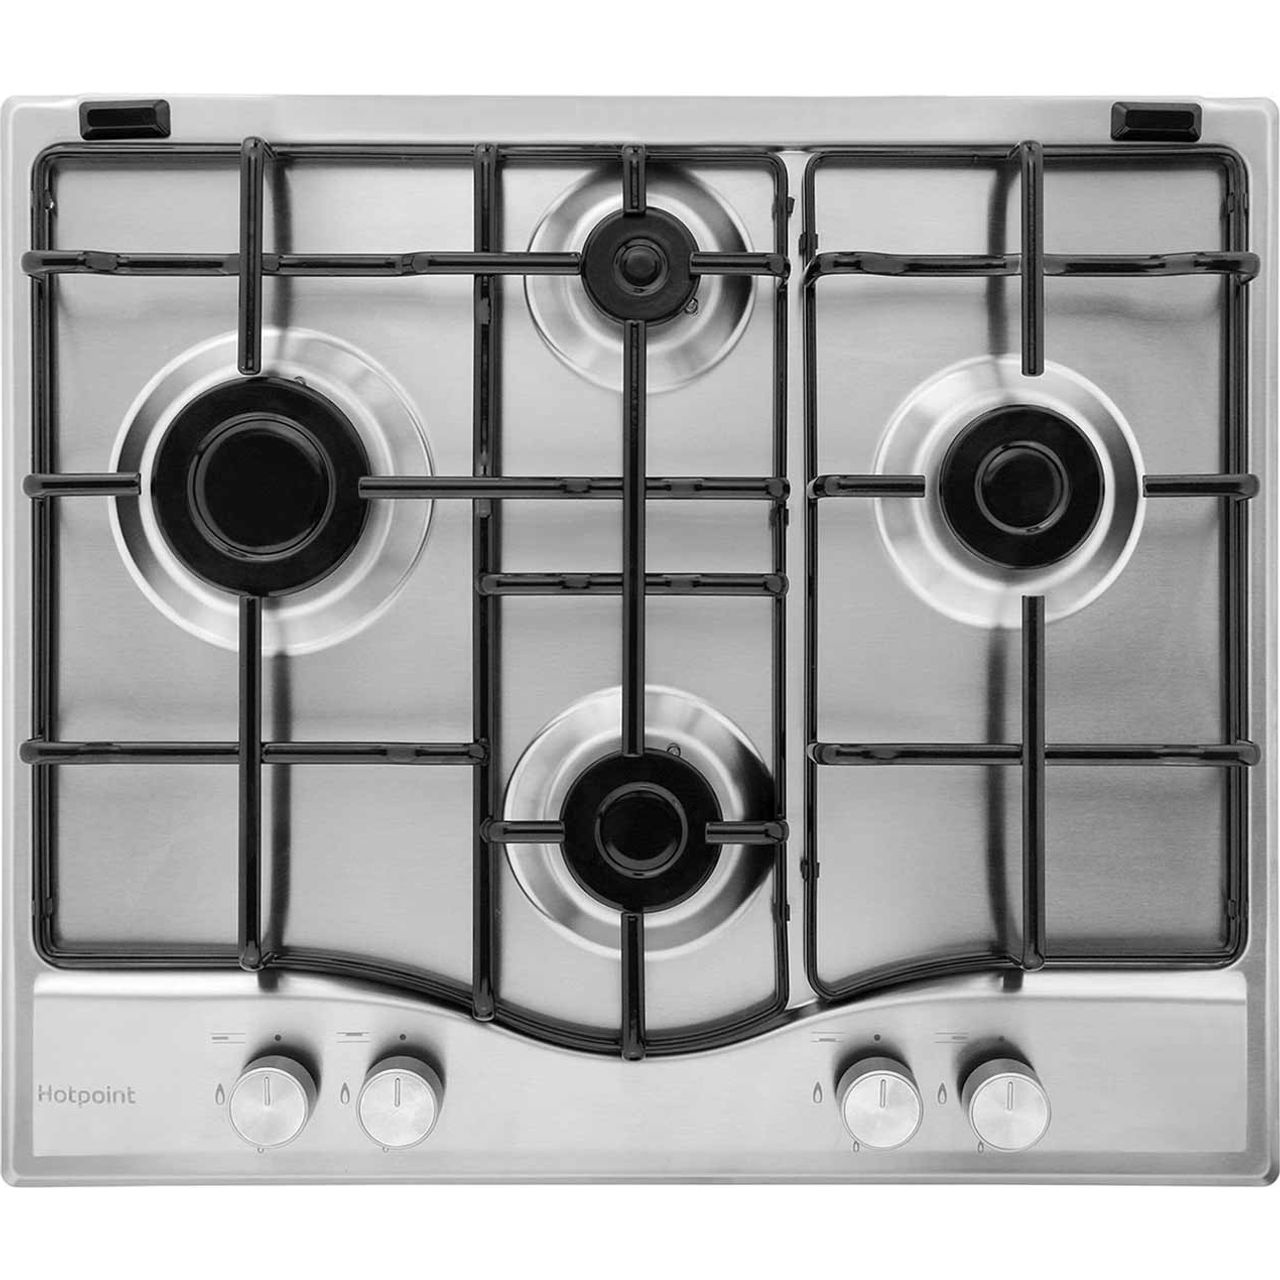 Hotpoint Newstyle PCN642IXH 59cm Gas Hob Review